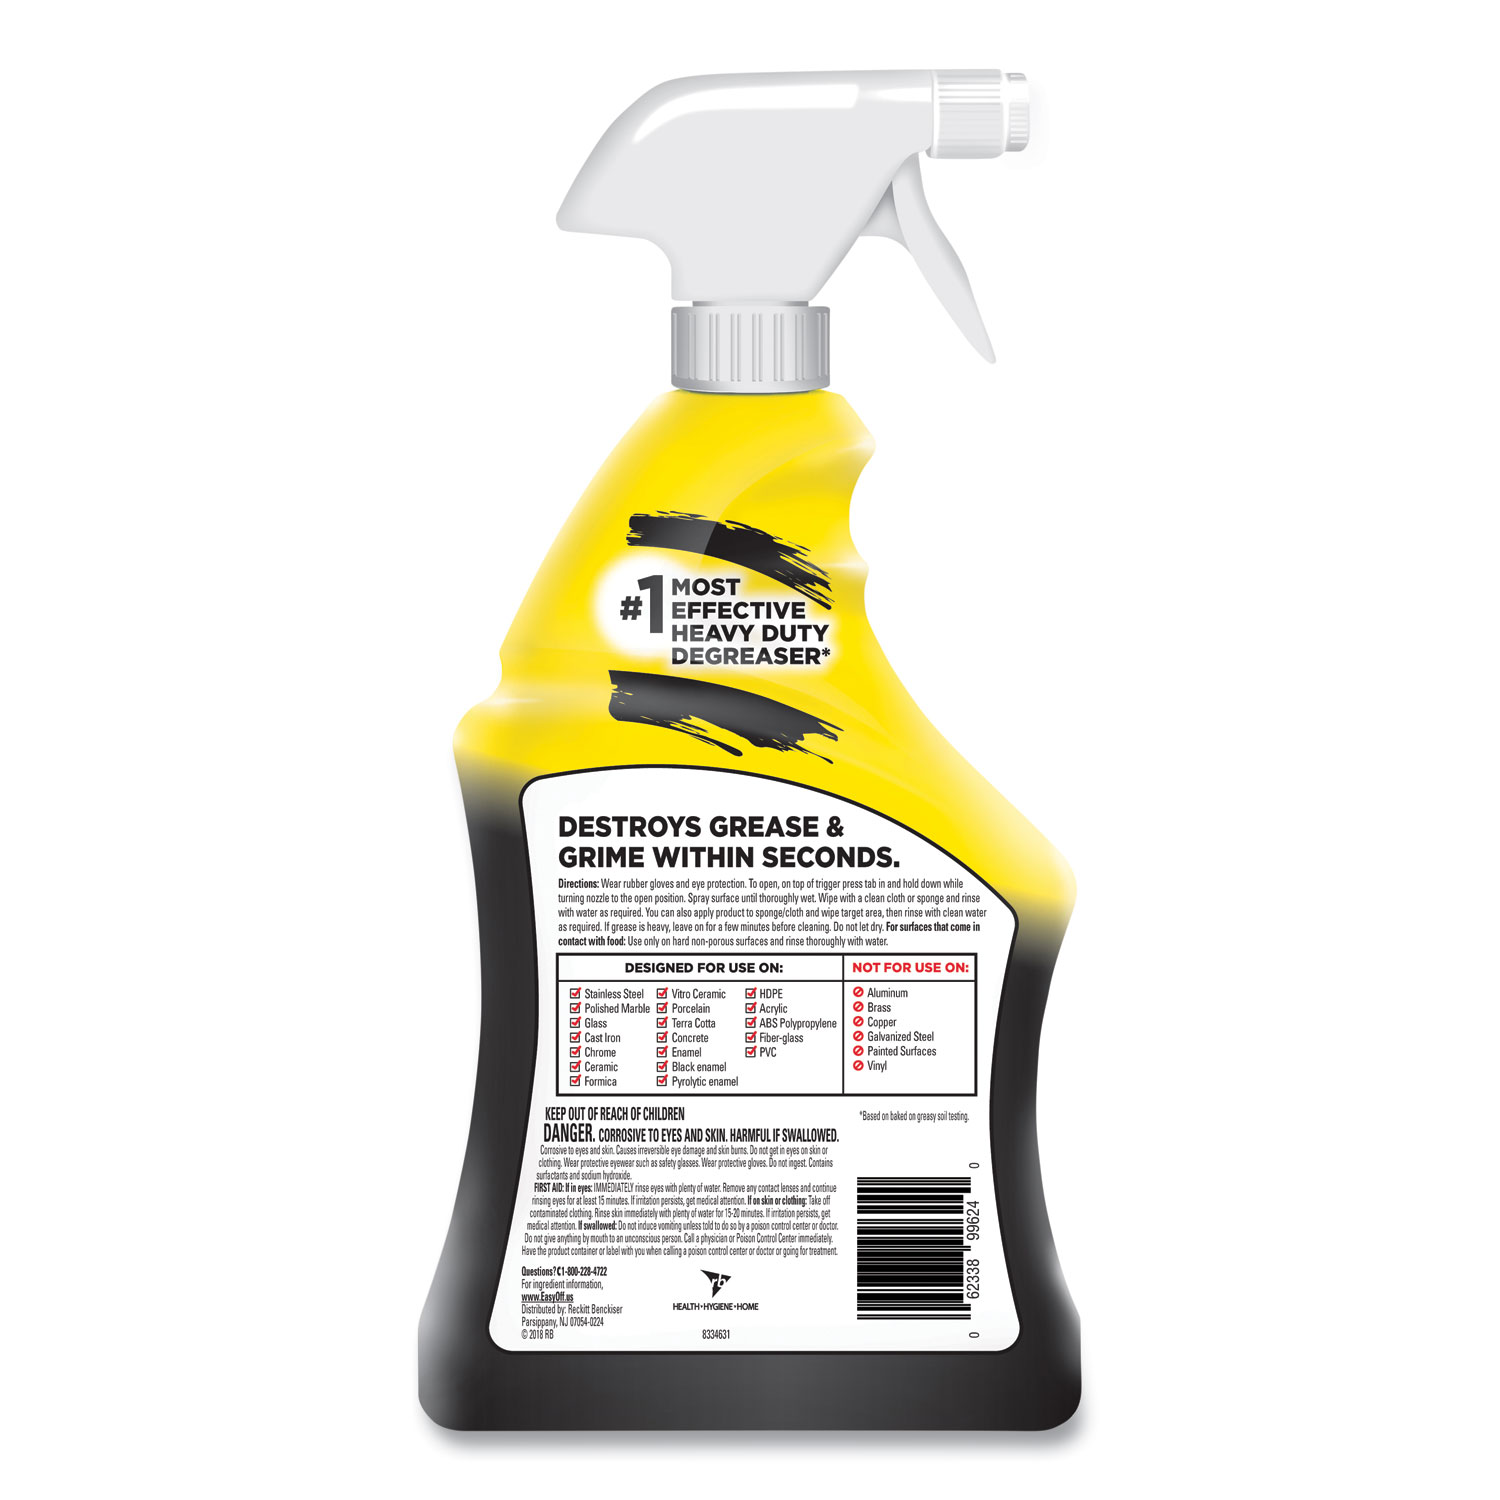 Hygienic Cleaner Degreaser Concentrate